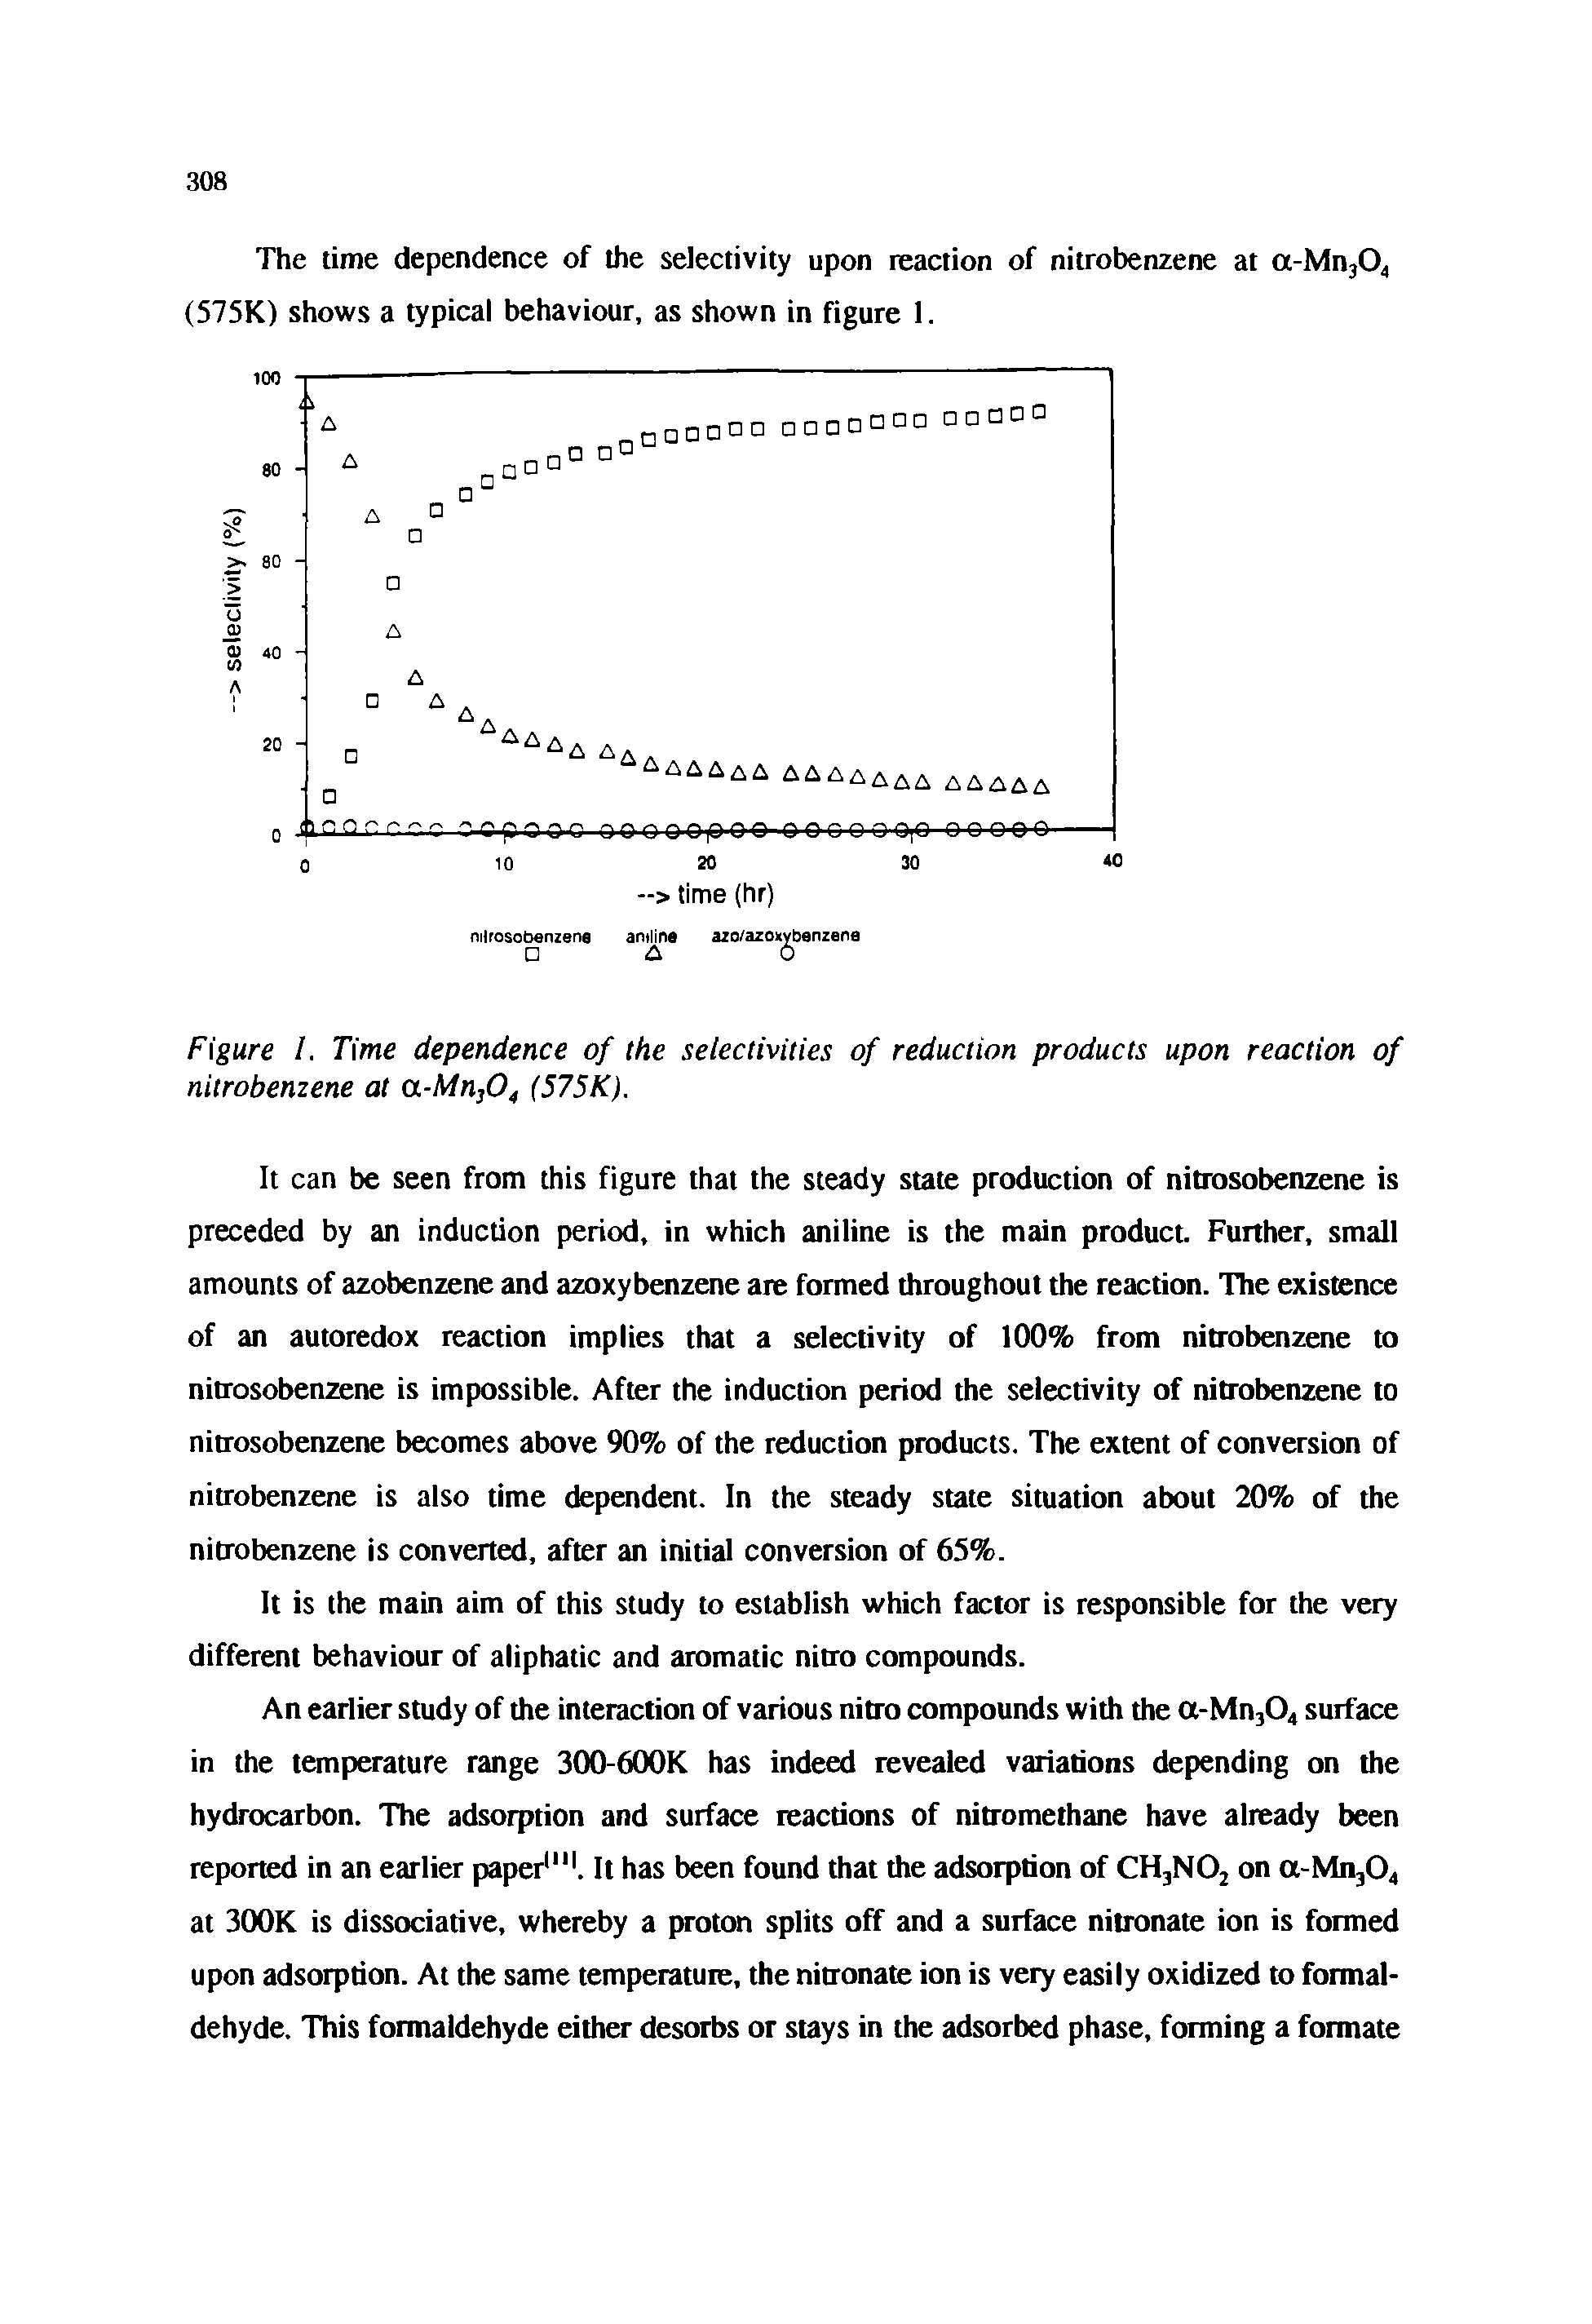 Figure /. Time dependence of the selectivities of reduction products upon reaction of nitrobenzene at a-Mn304 (575K).